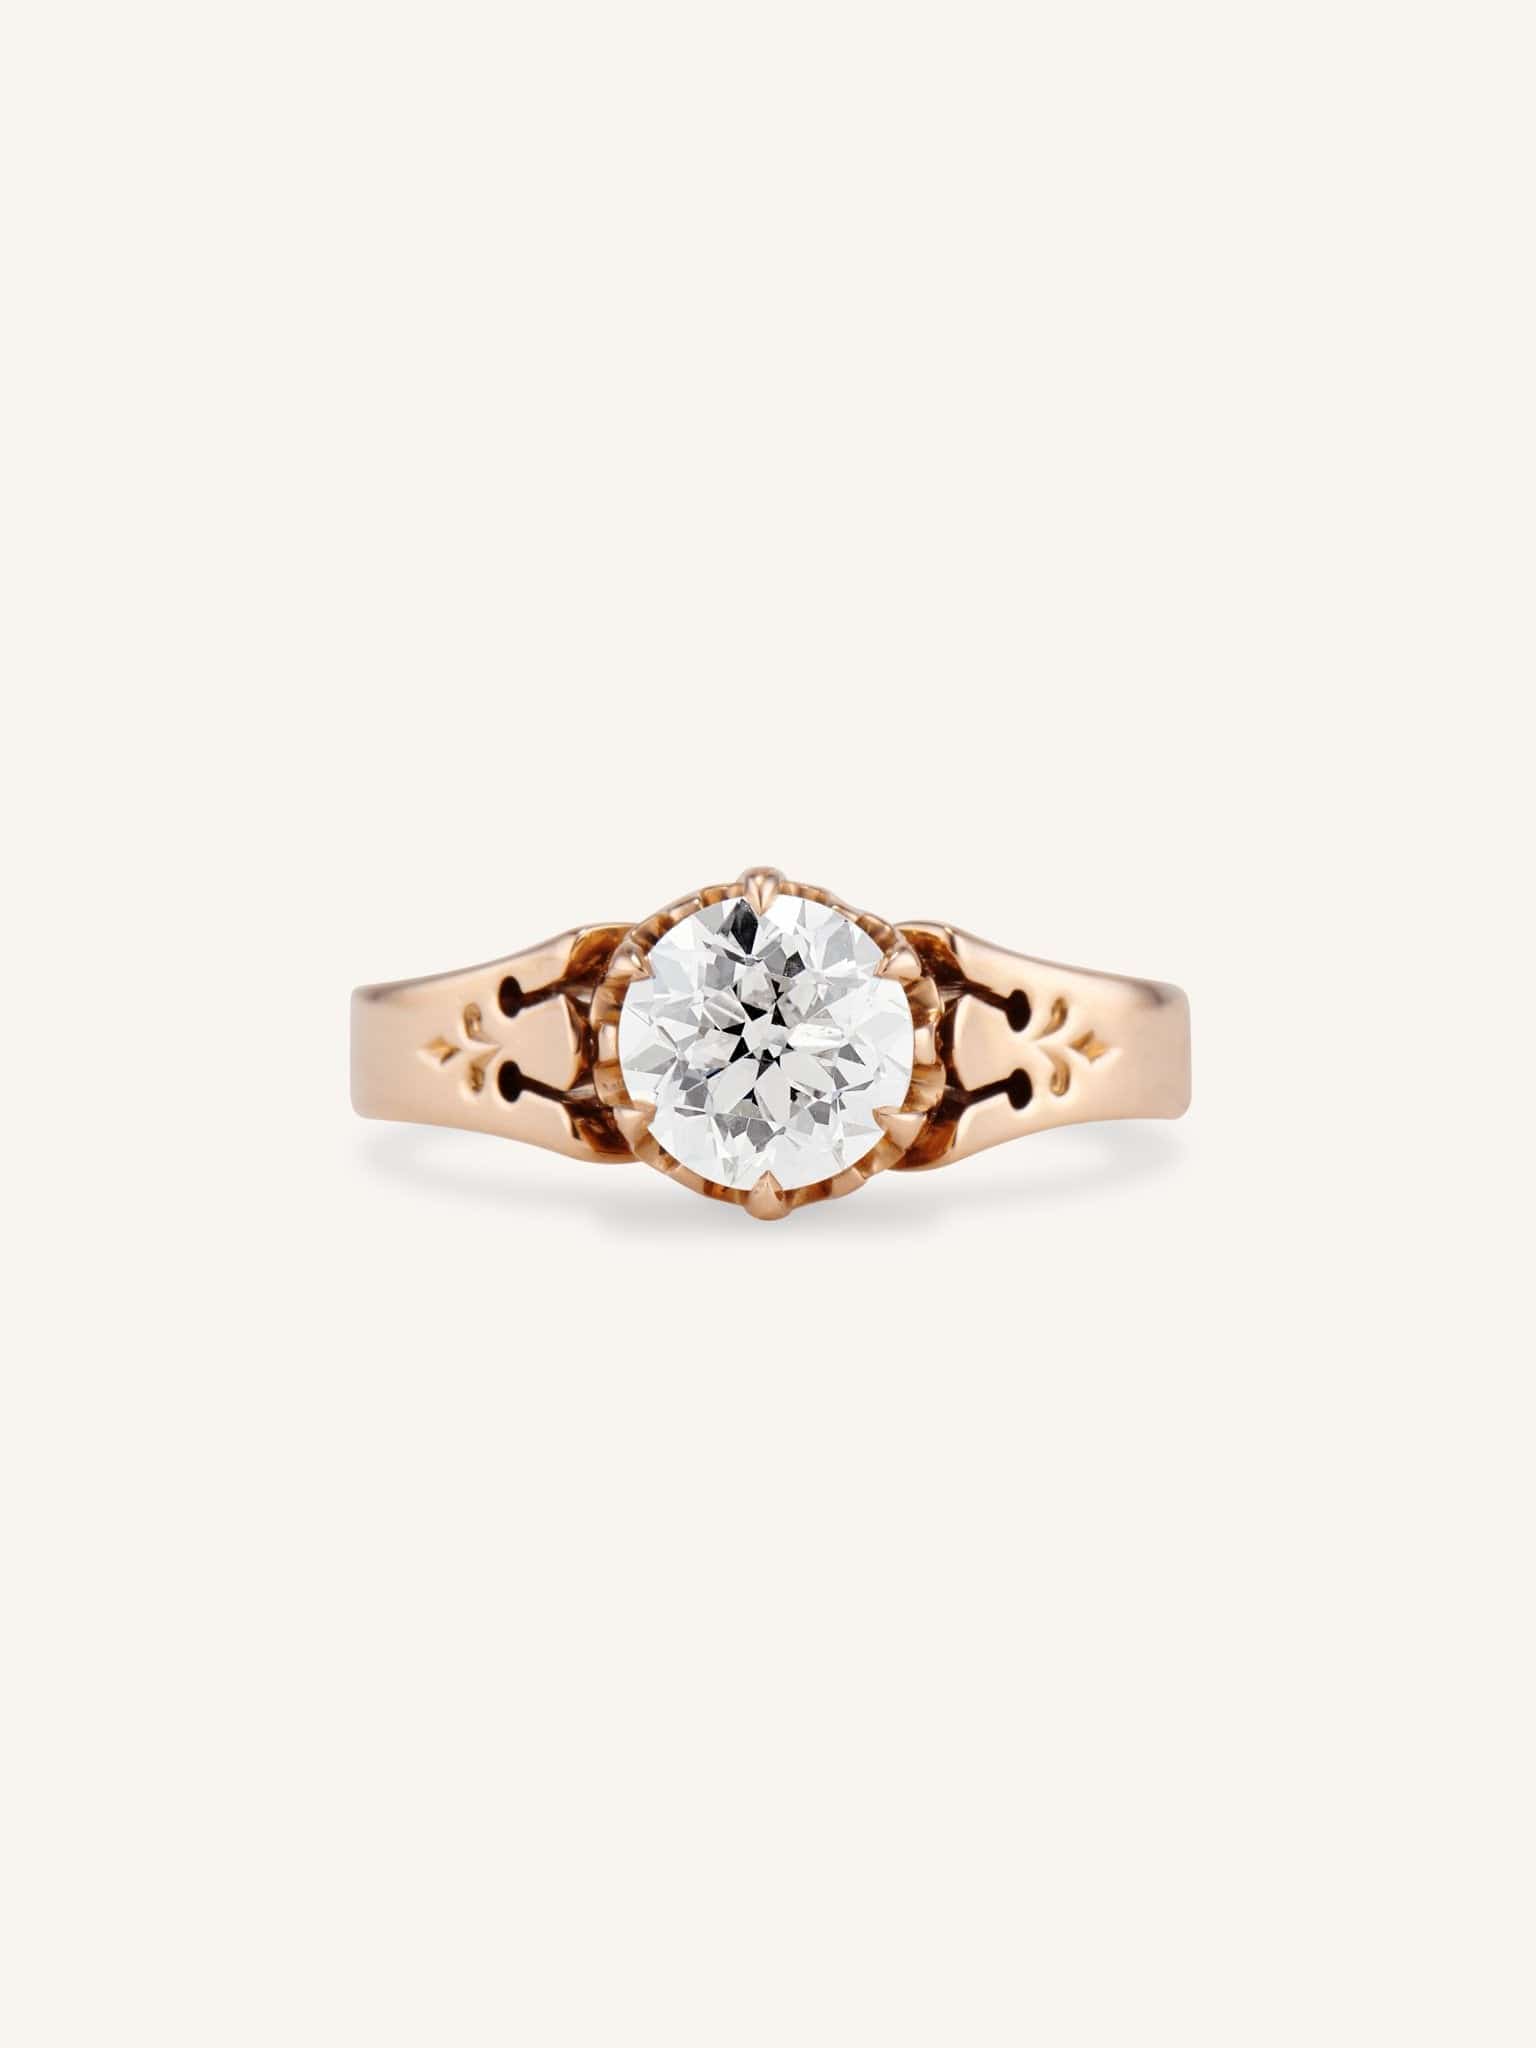 14k Rose Gold Custom Antique Hand Engraved Diamond Solitaire Engagement Ring  #100716 - Seattle Bellevue | Joseph Jewelry